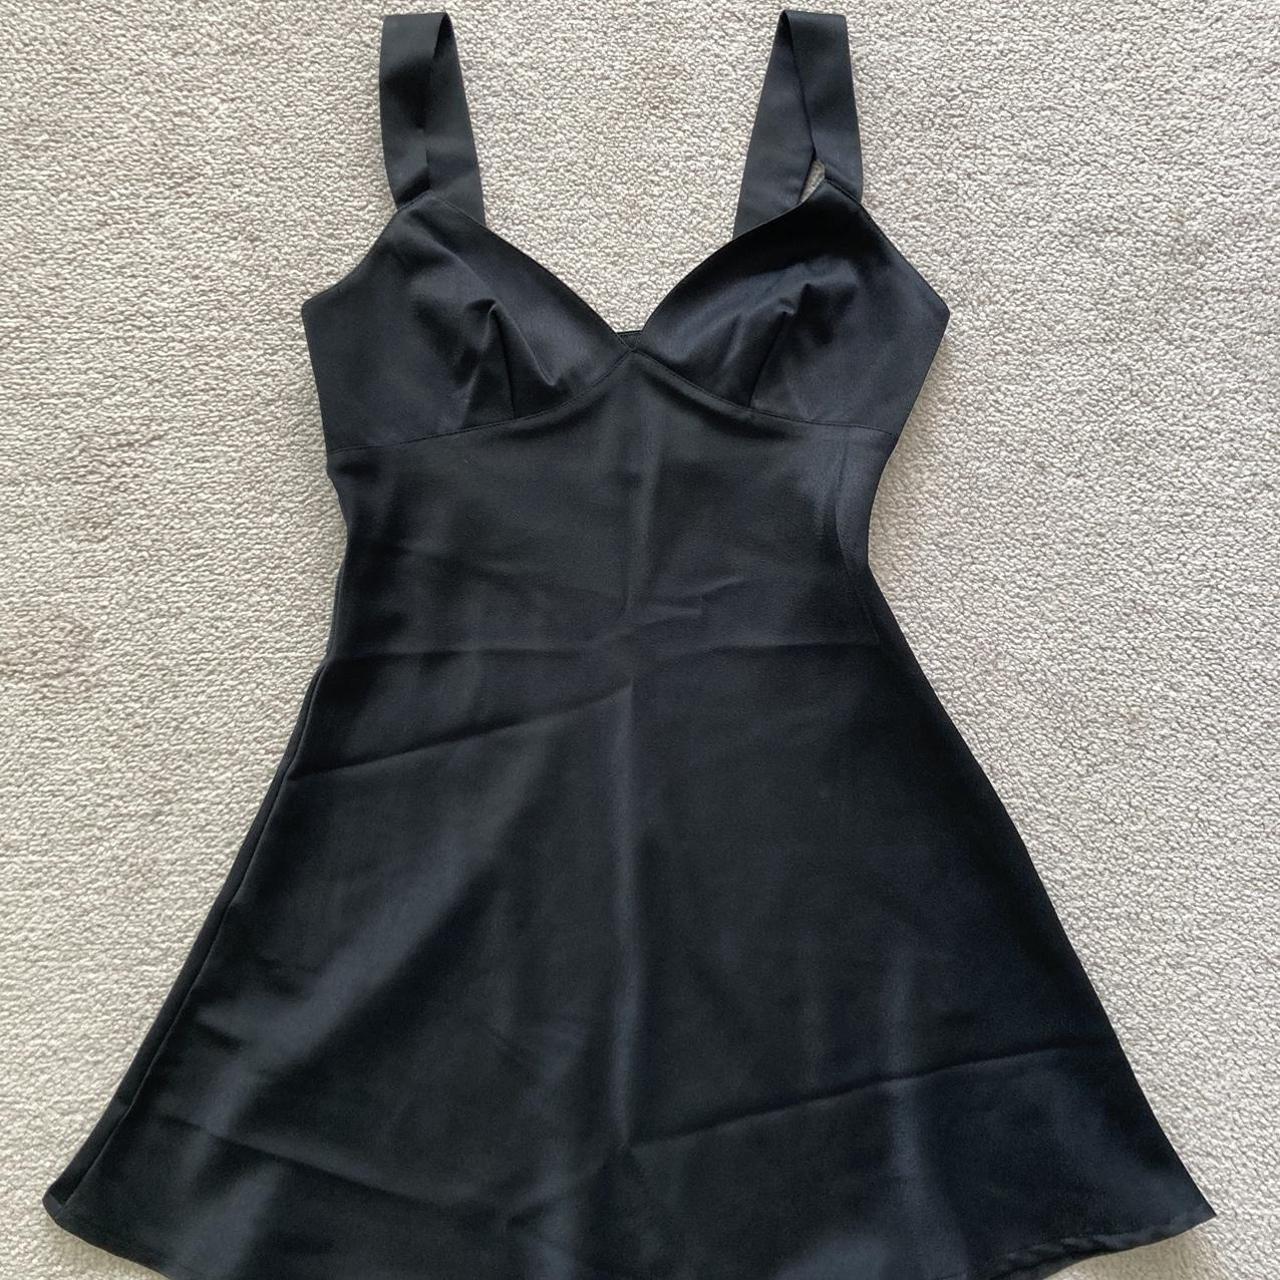 The Perfect Lil Black Cocktail Party Dress XS/S. ️... - Depop